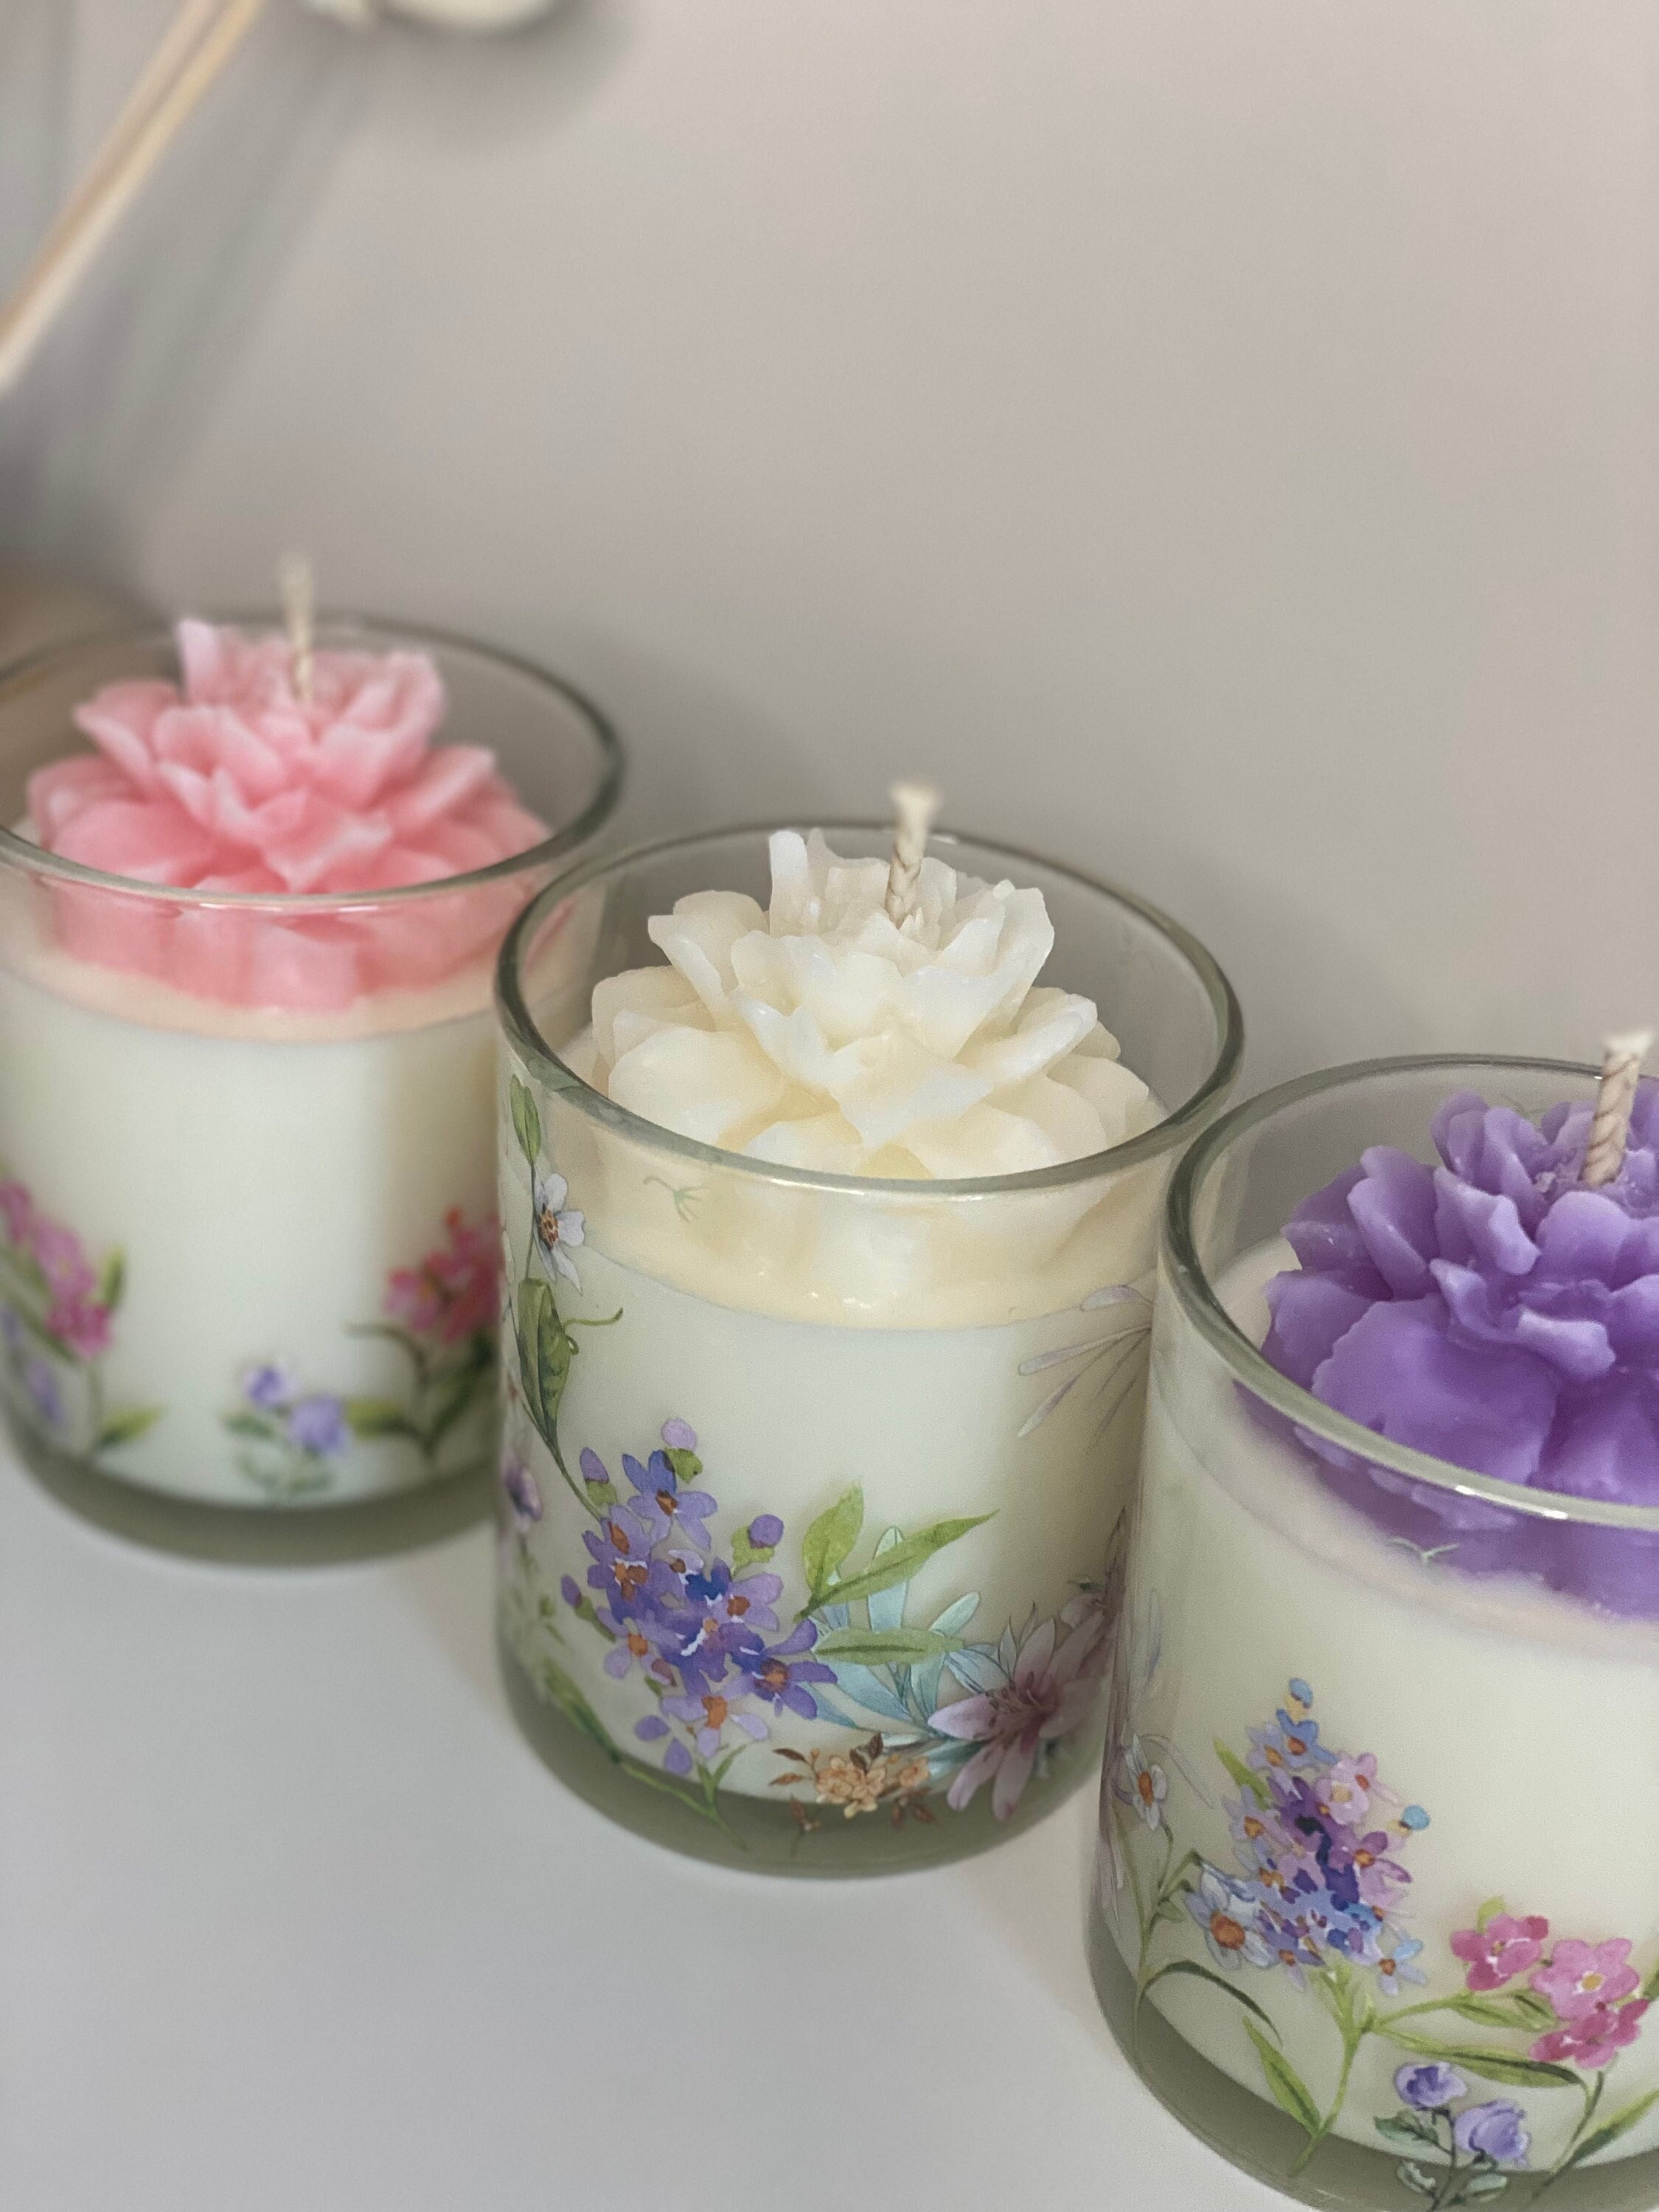 Carnation Flower Candle | Soy Wax Candles | Decor Candles | Scented Candles  | Favors | Gift Ideas | Home Decor | Customized Gift